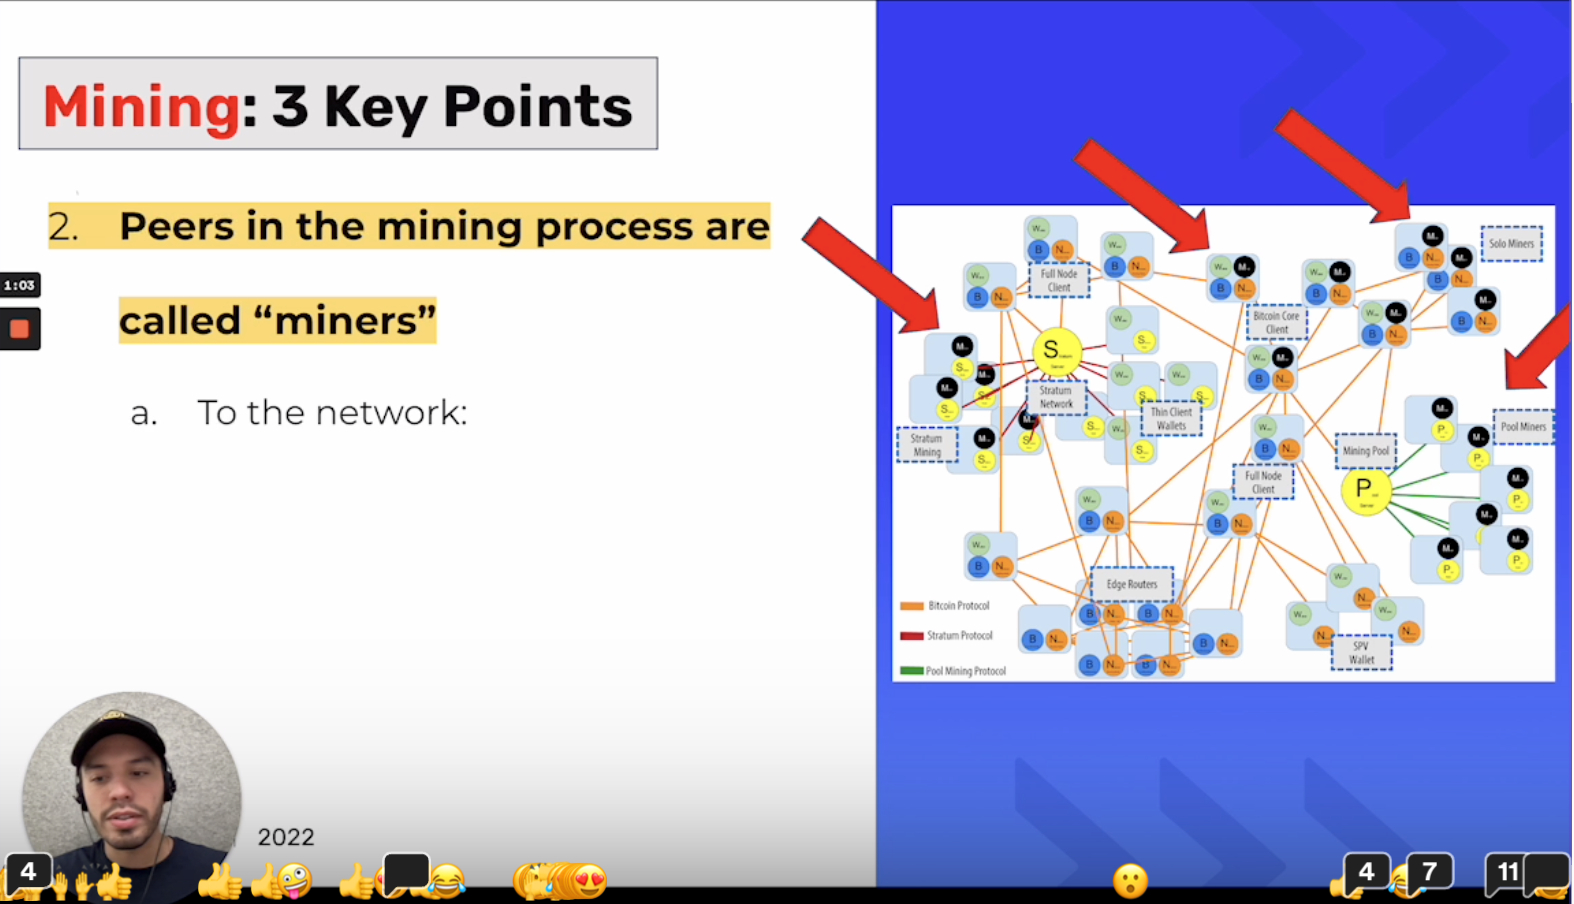 miners in network